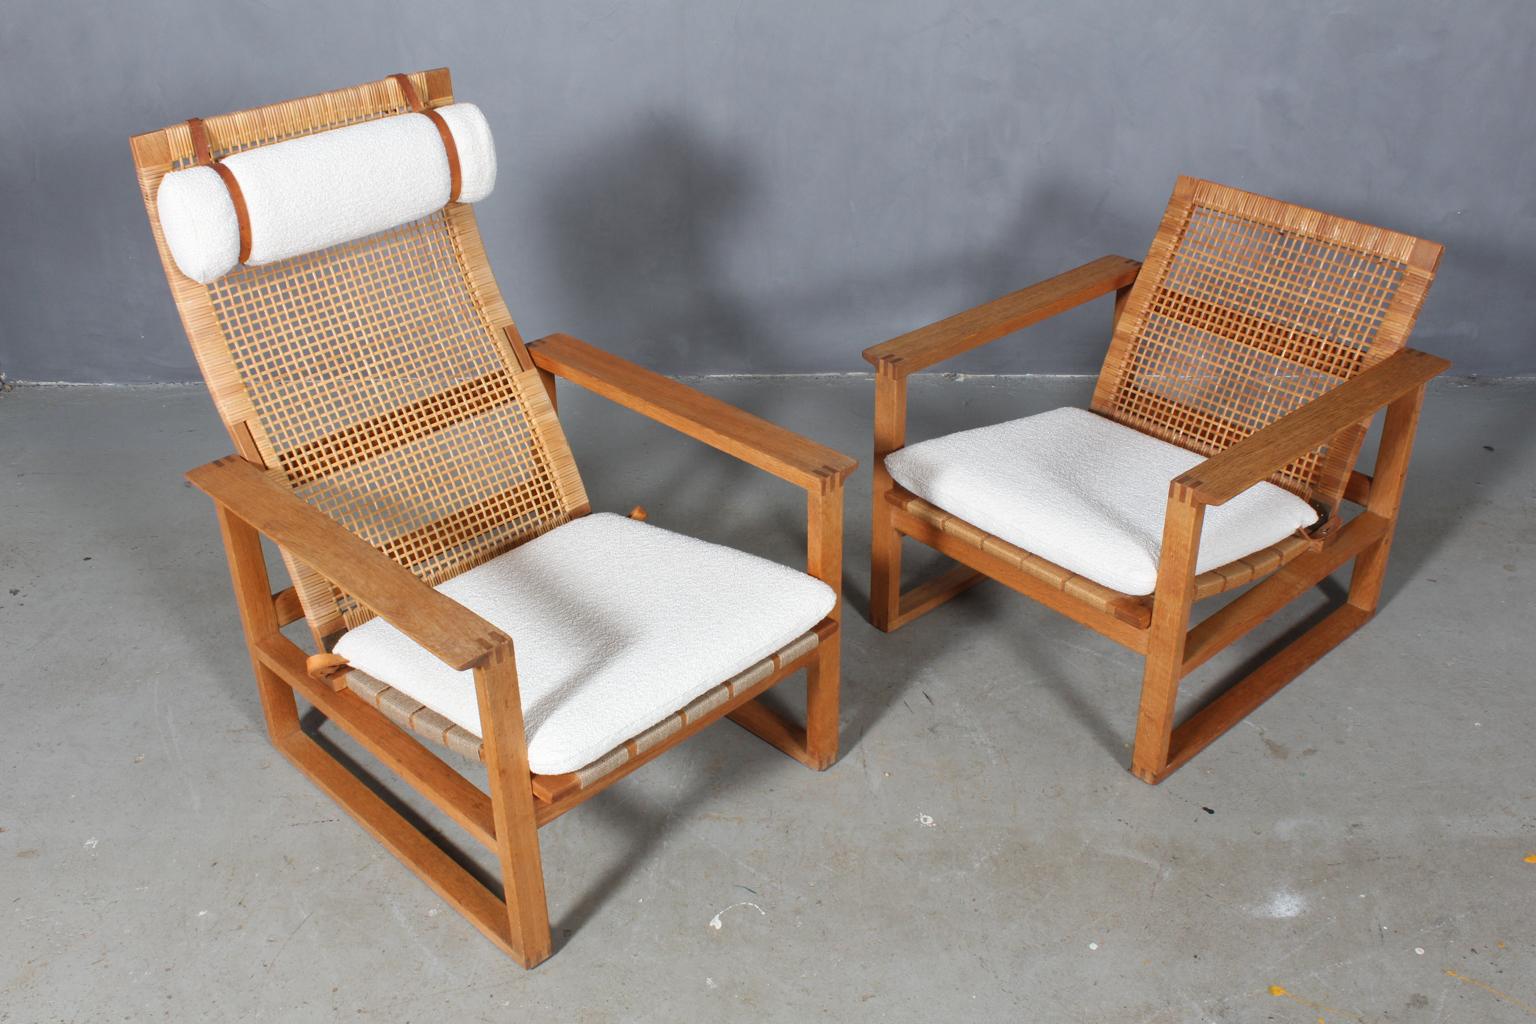 A Børge Mogensen lounge chairs designed in 1956 model number 2256 for Fredericia Stolefabrik. Cubical frames made of solid oak with finger joints and cane. This high back model 2254 also reclines.

Reupholstered in Boucle wool, the chair has cane